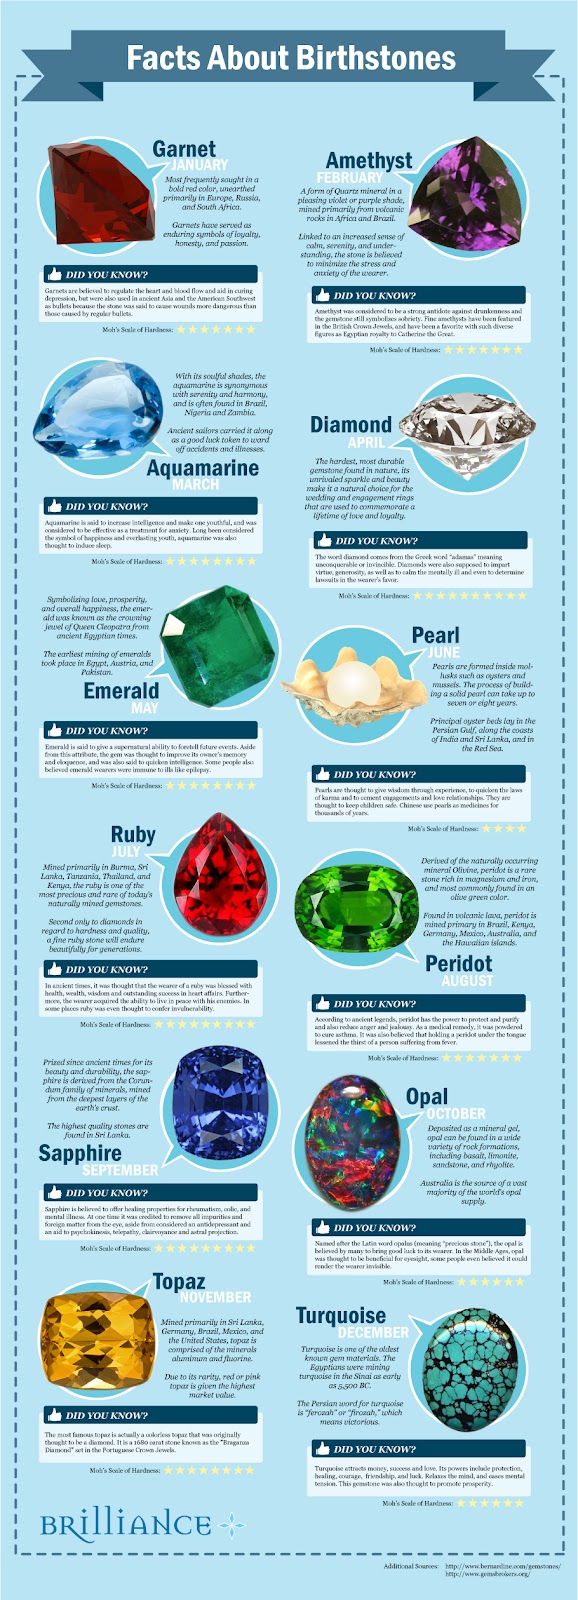 Learn interesting details about Birthstones